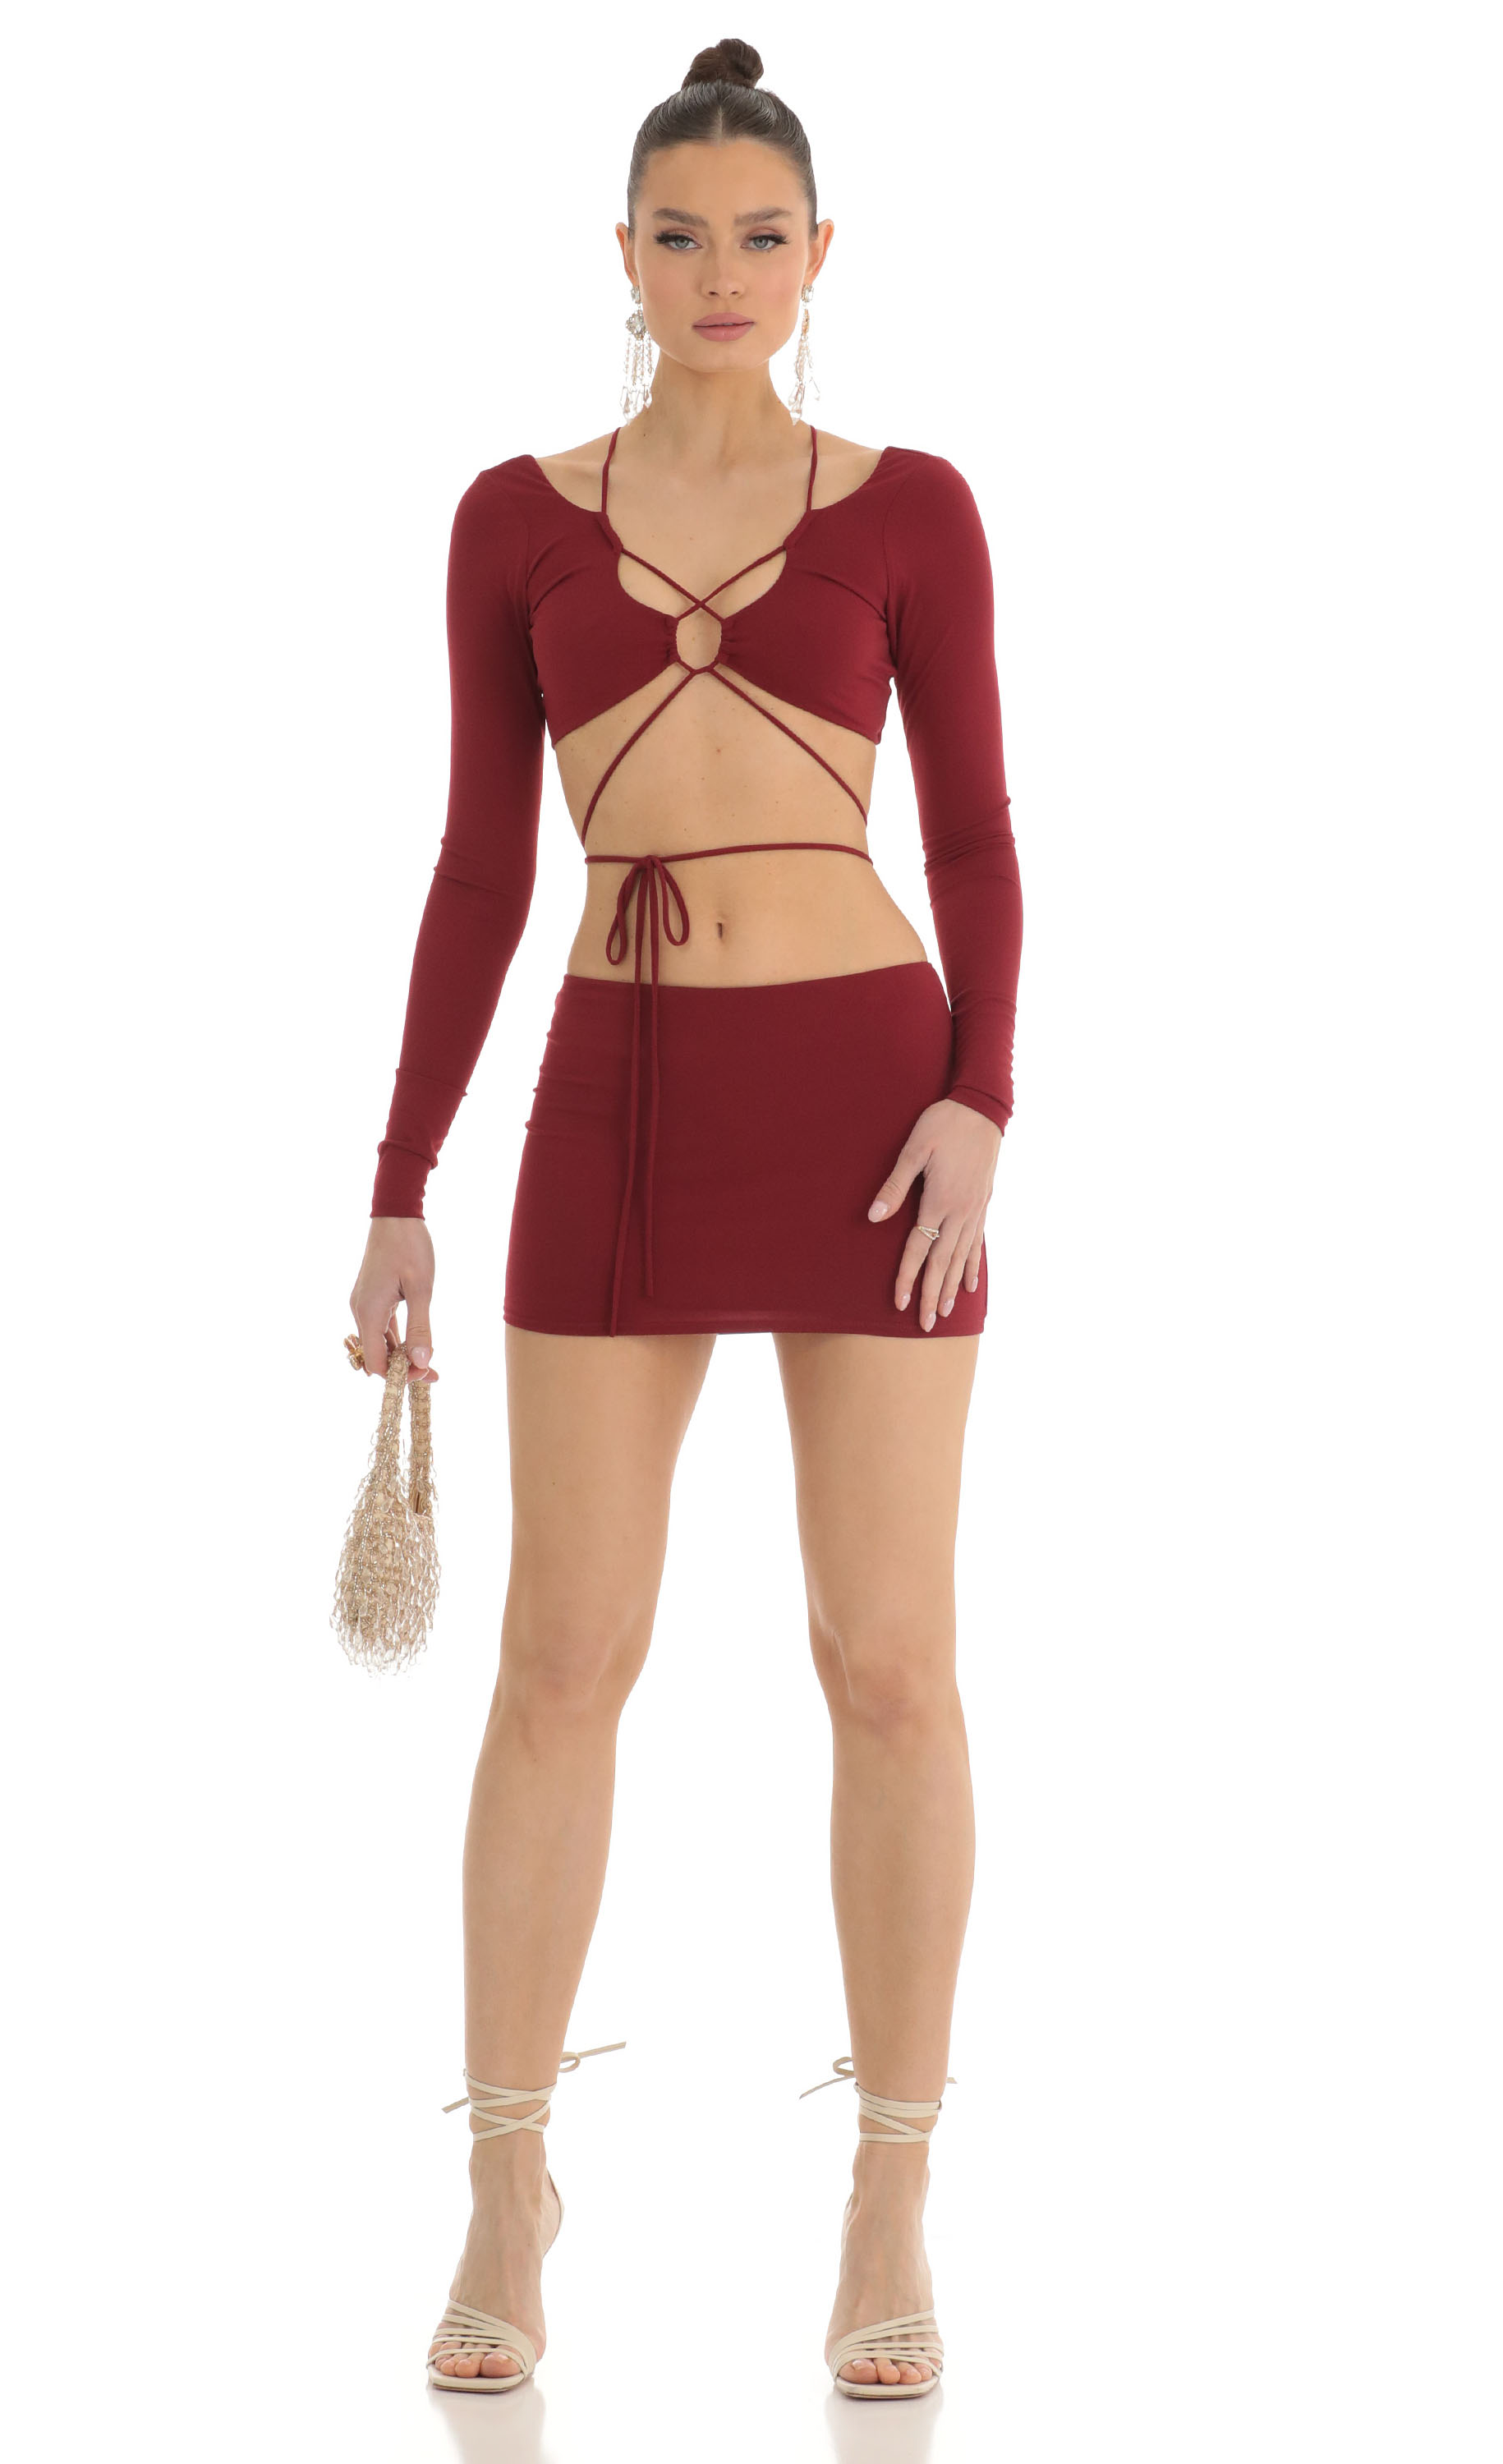 Tabitha Cutout Two Piece Skirt Set in Red